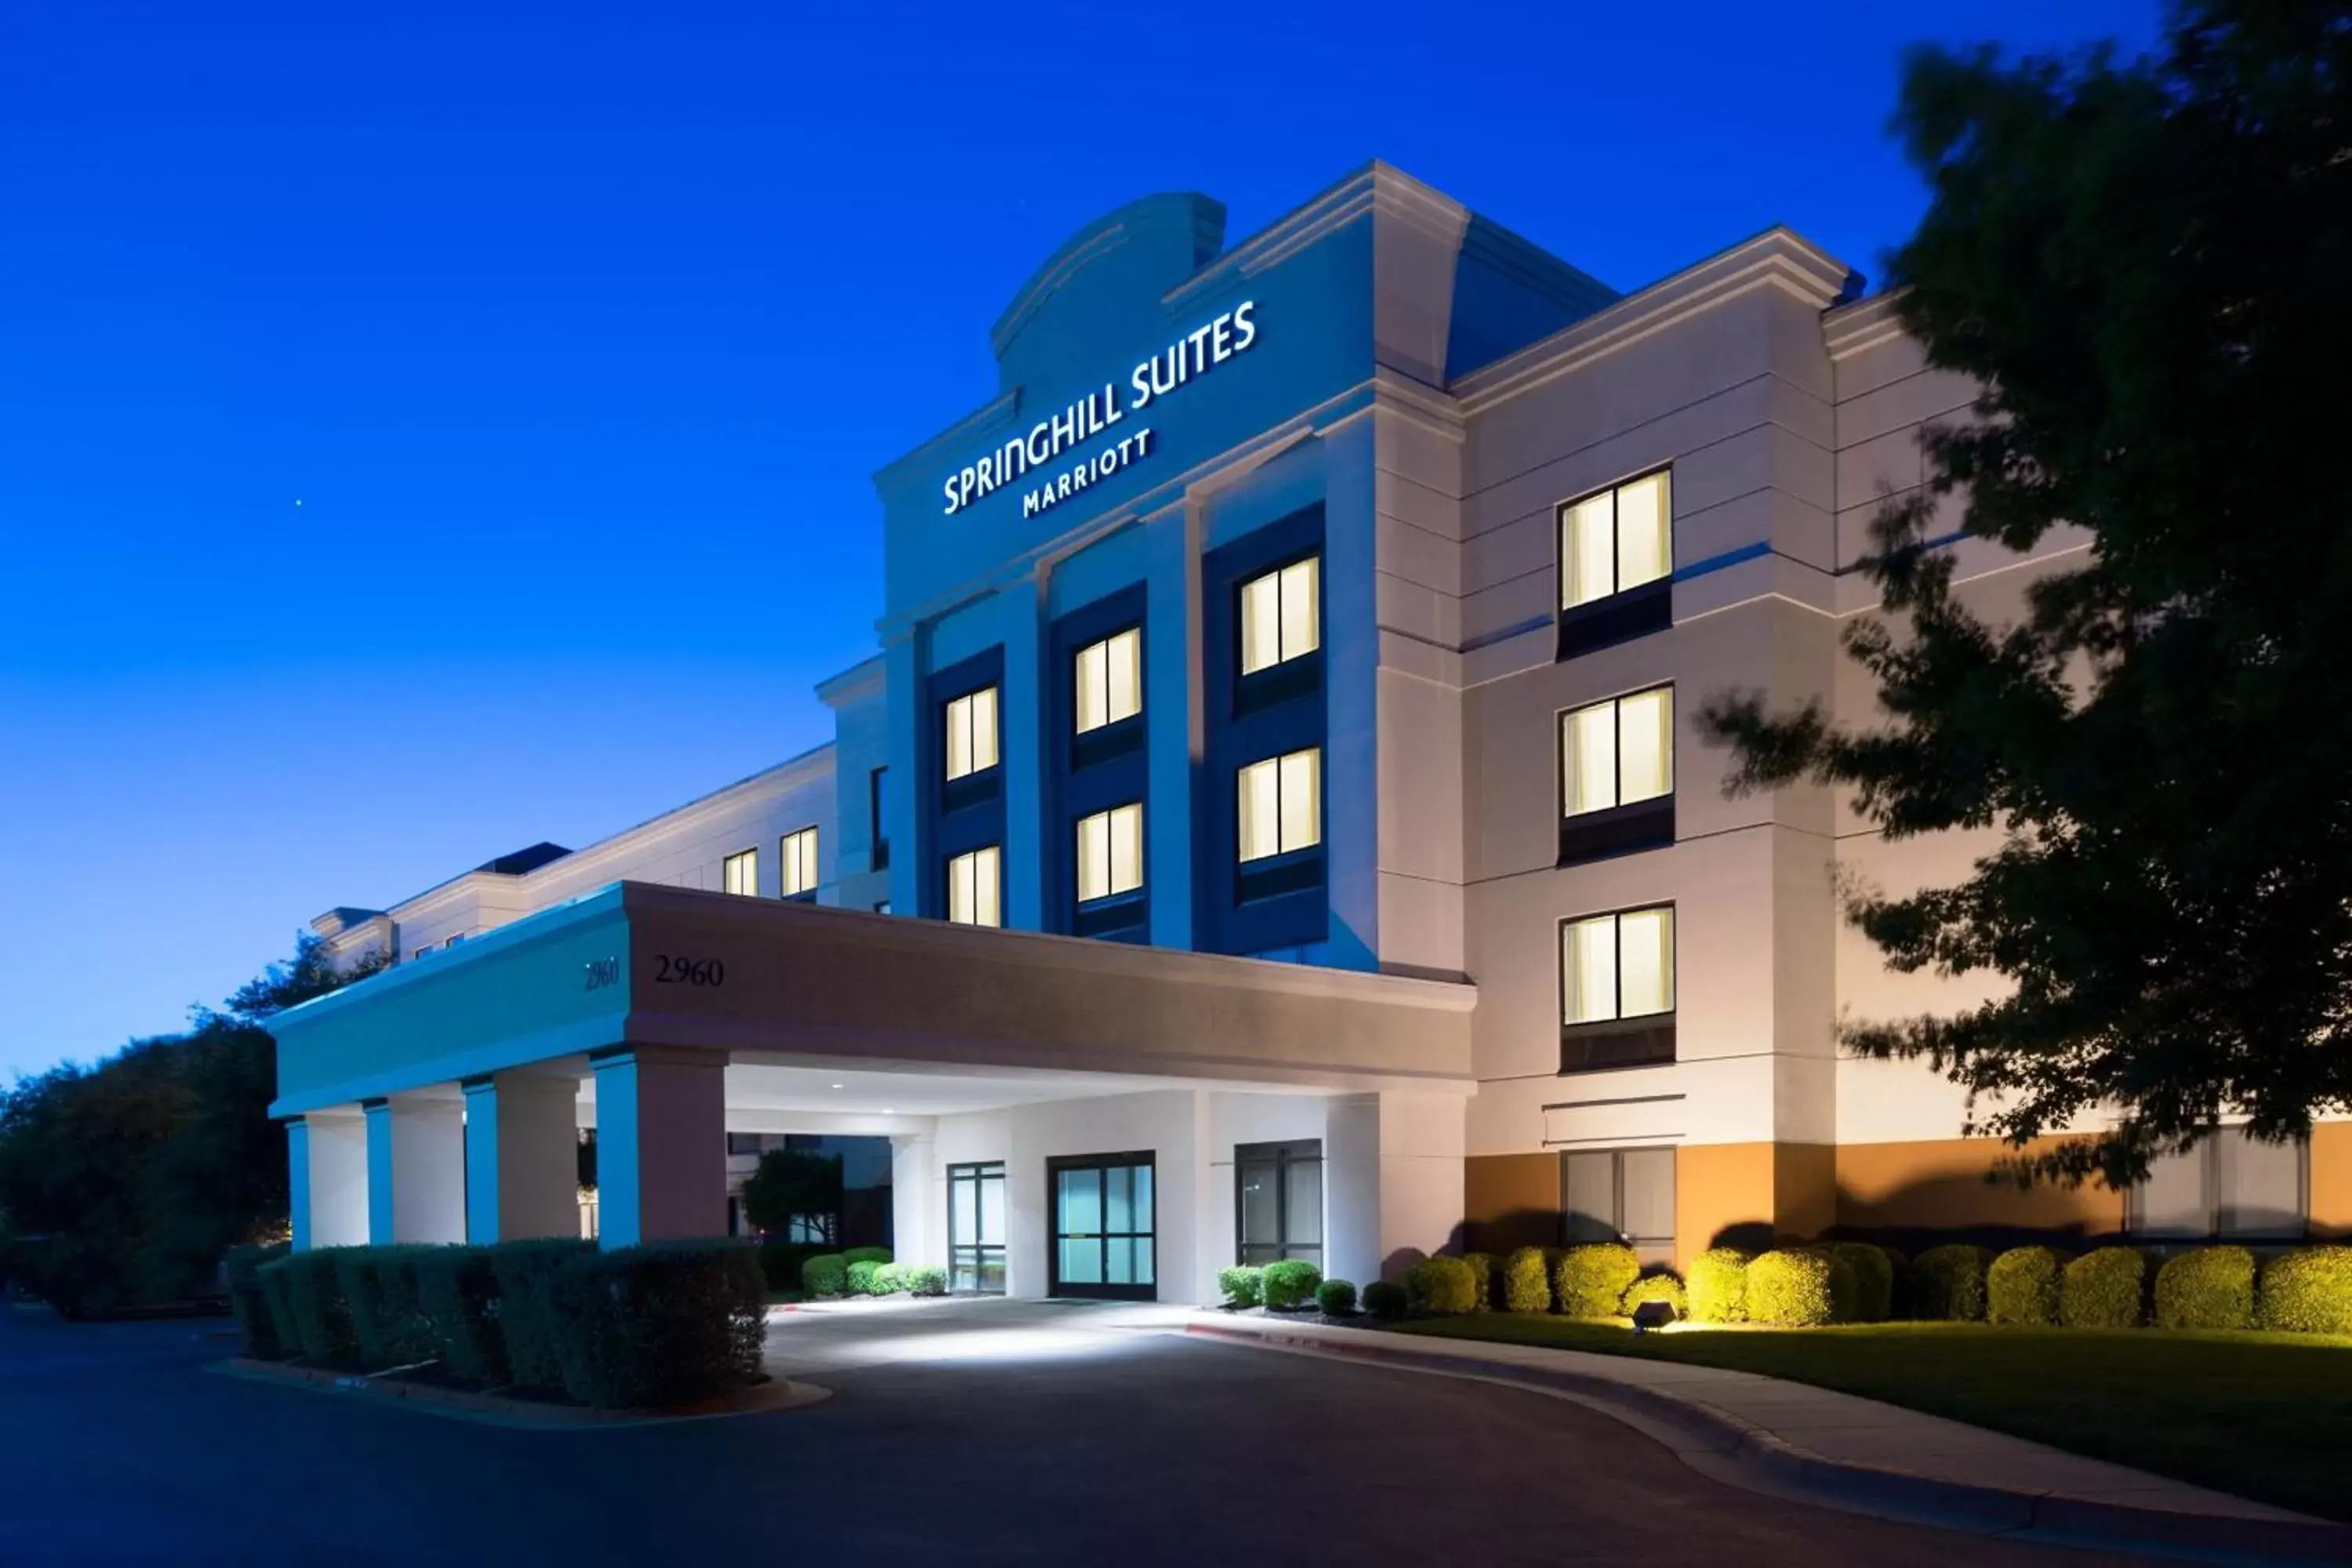 Property Building in SpringHill Suites Austin Round Rock